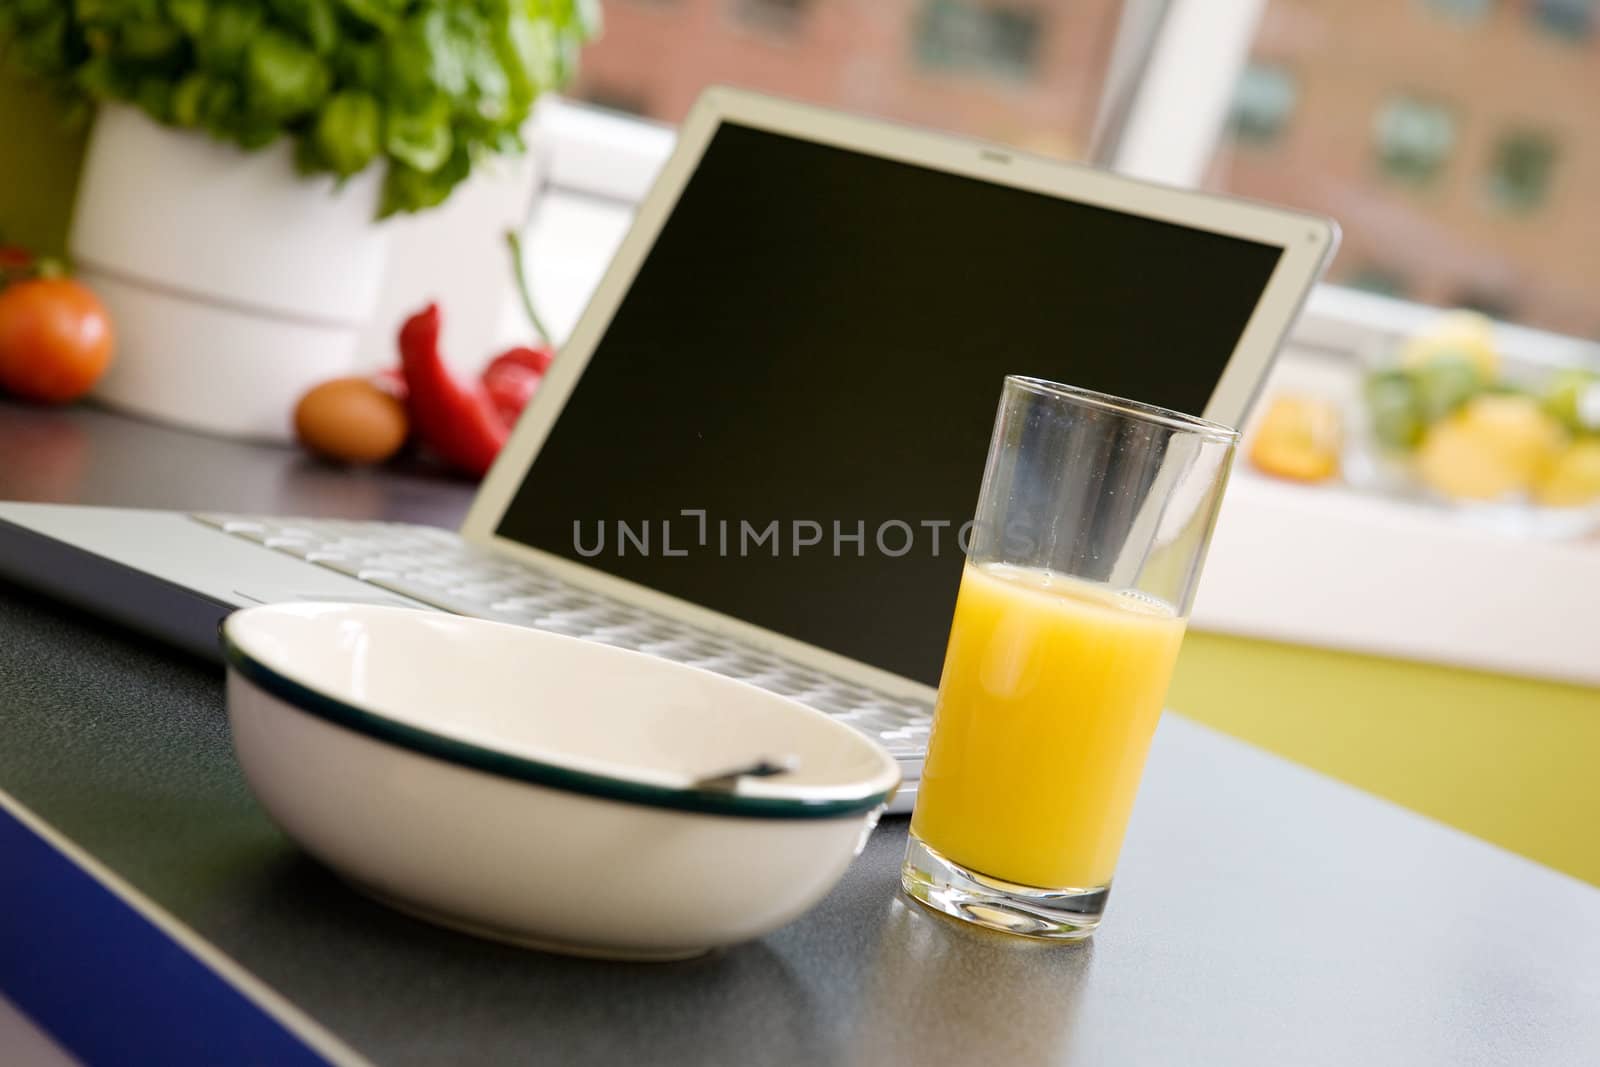 A computer in the kitchen with a bowl of soupr or cereal and orange juice - shallow depth of field with focus on juice